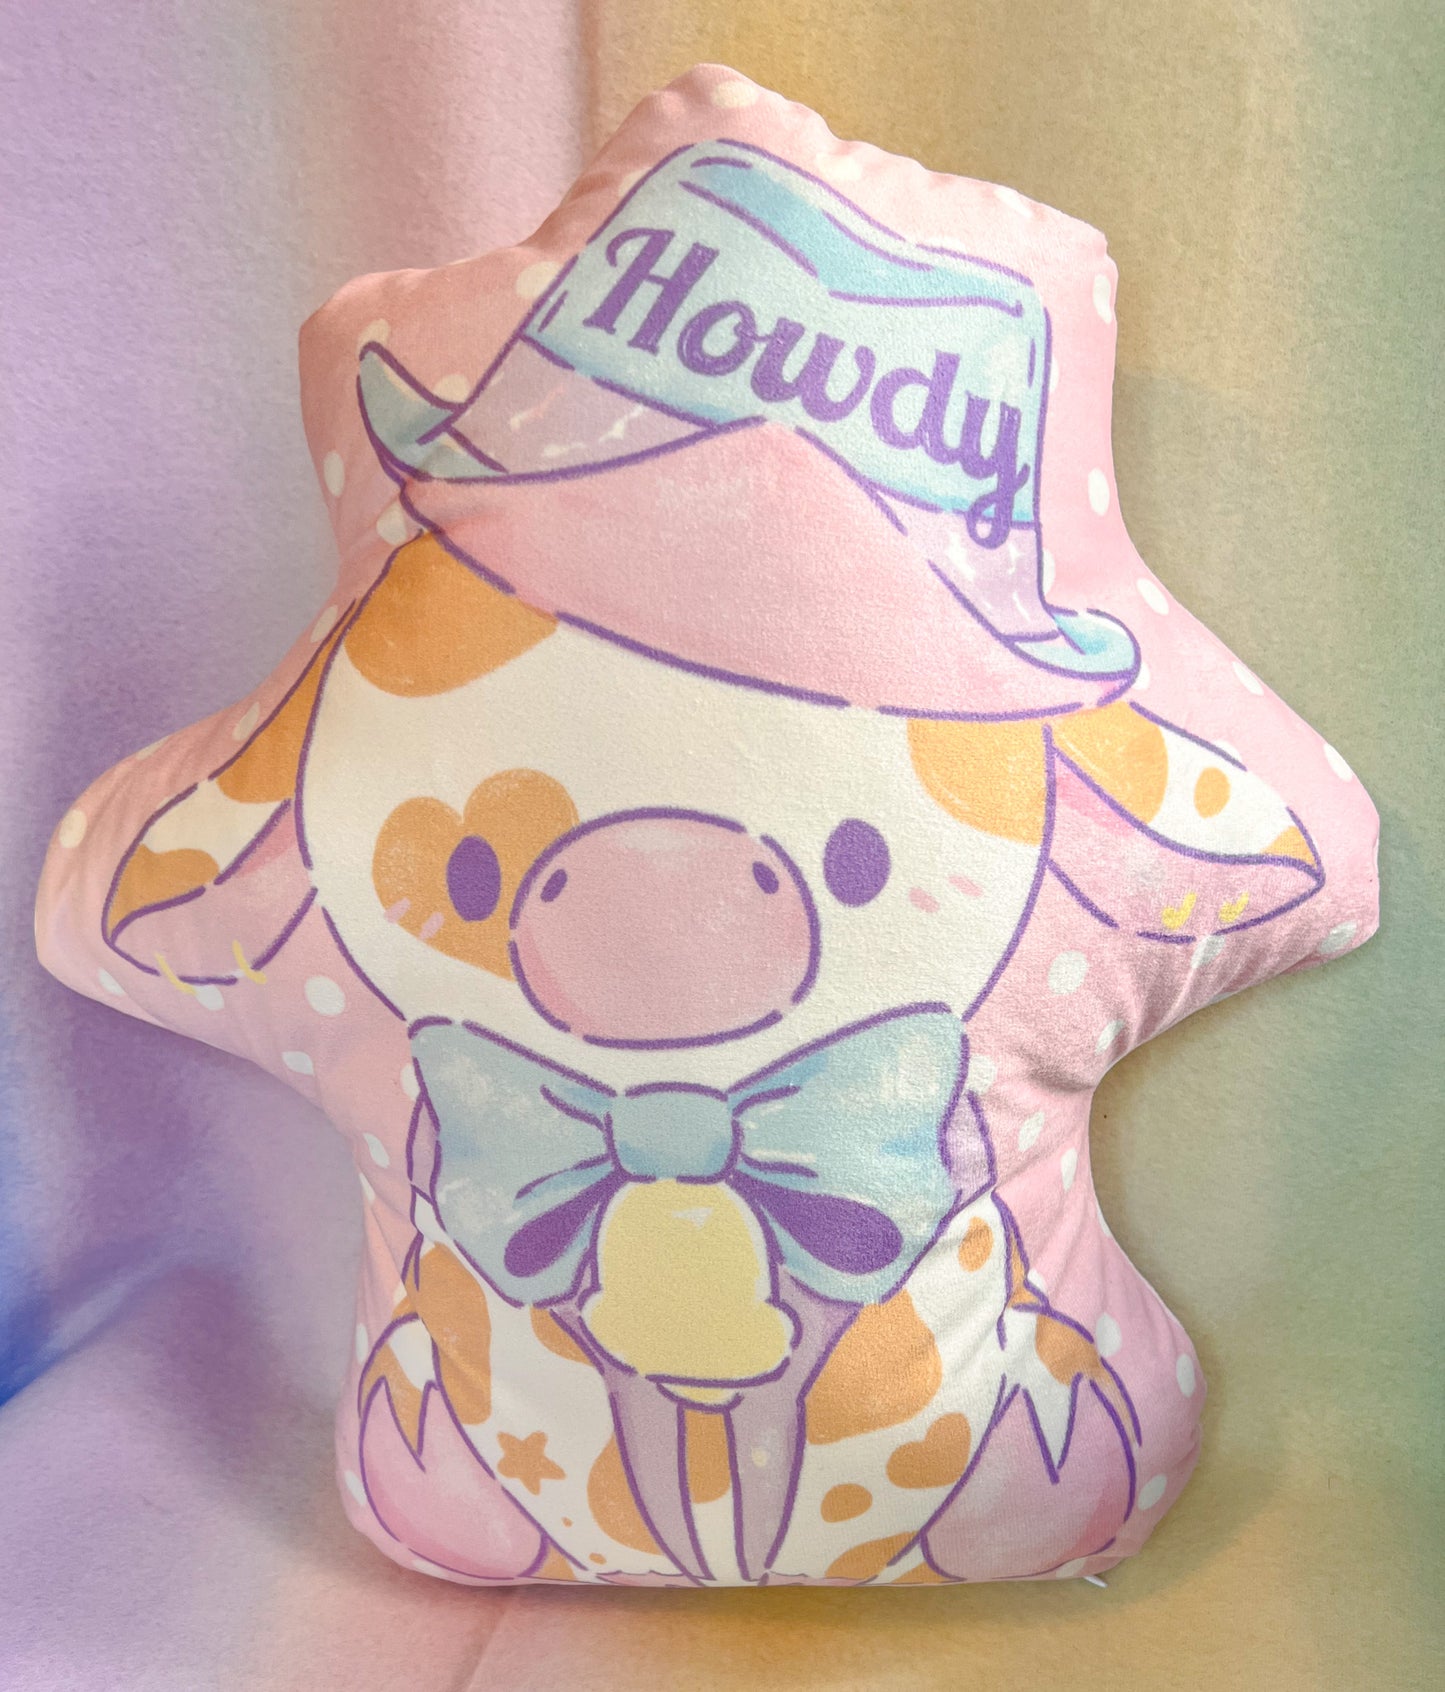 (Unstuffed) Howdy Cow Throw Pillow